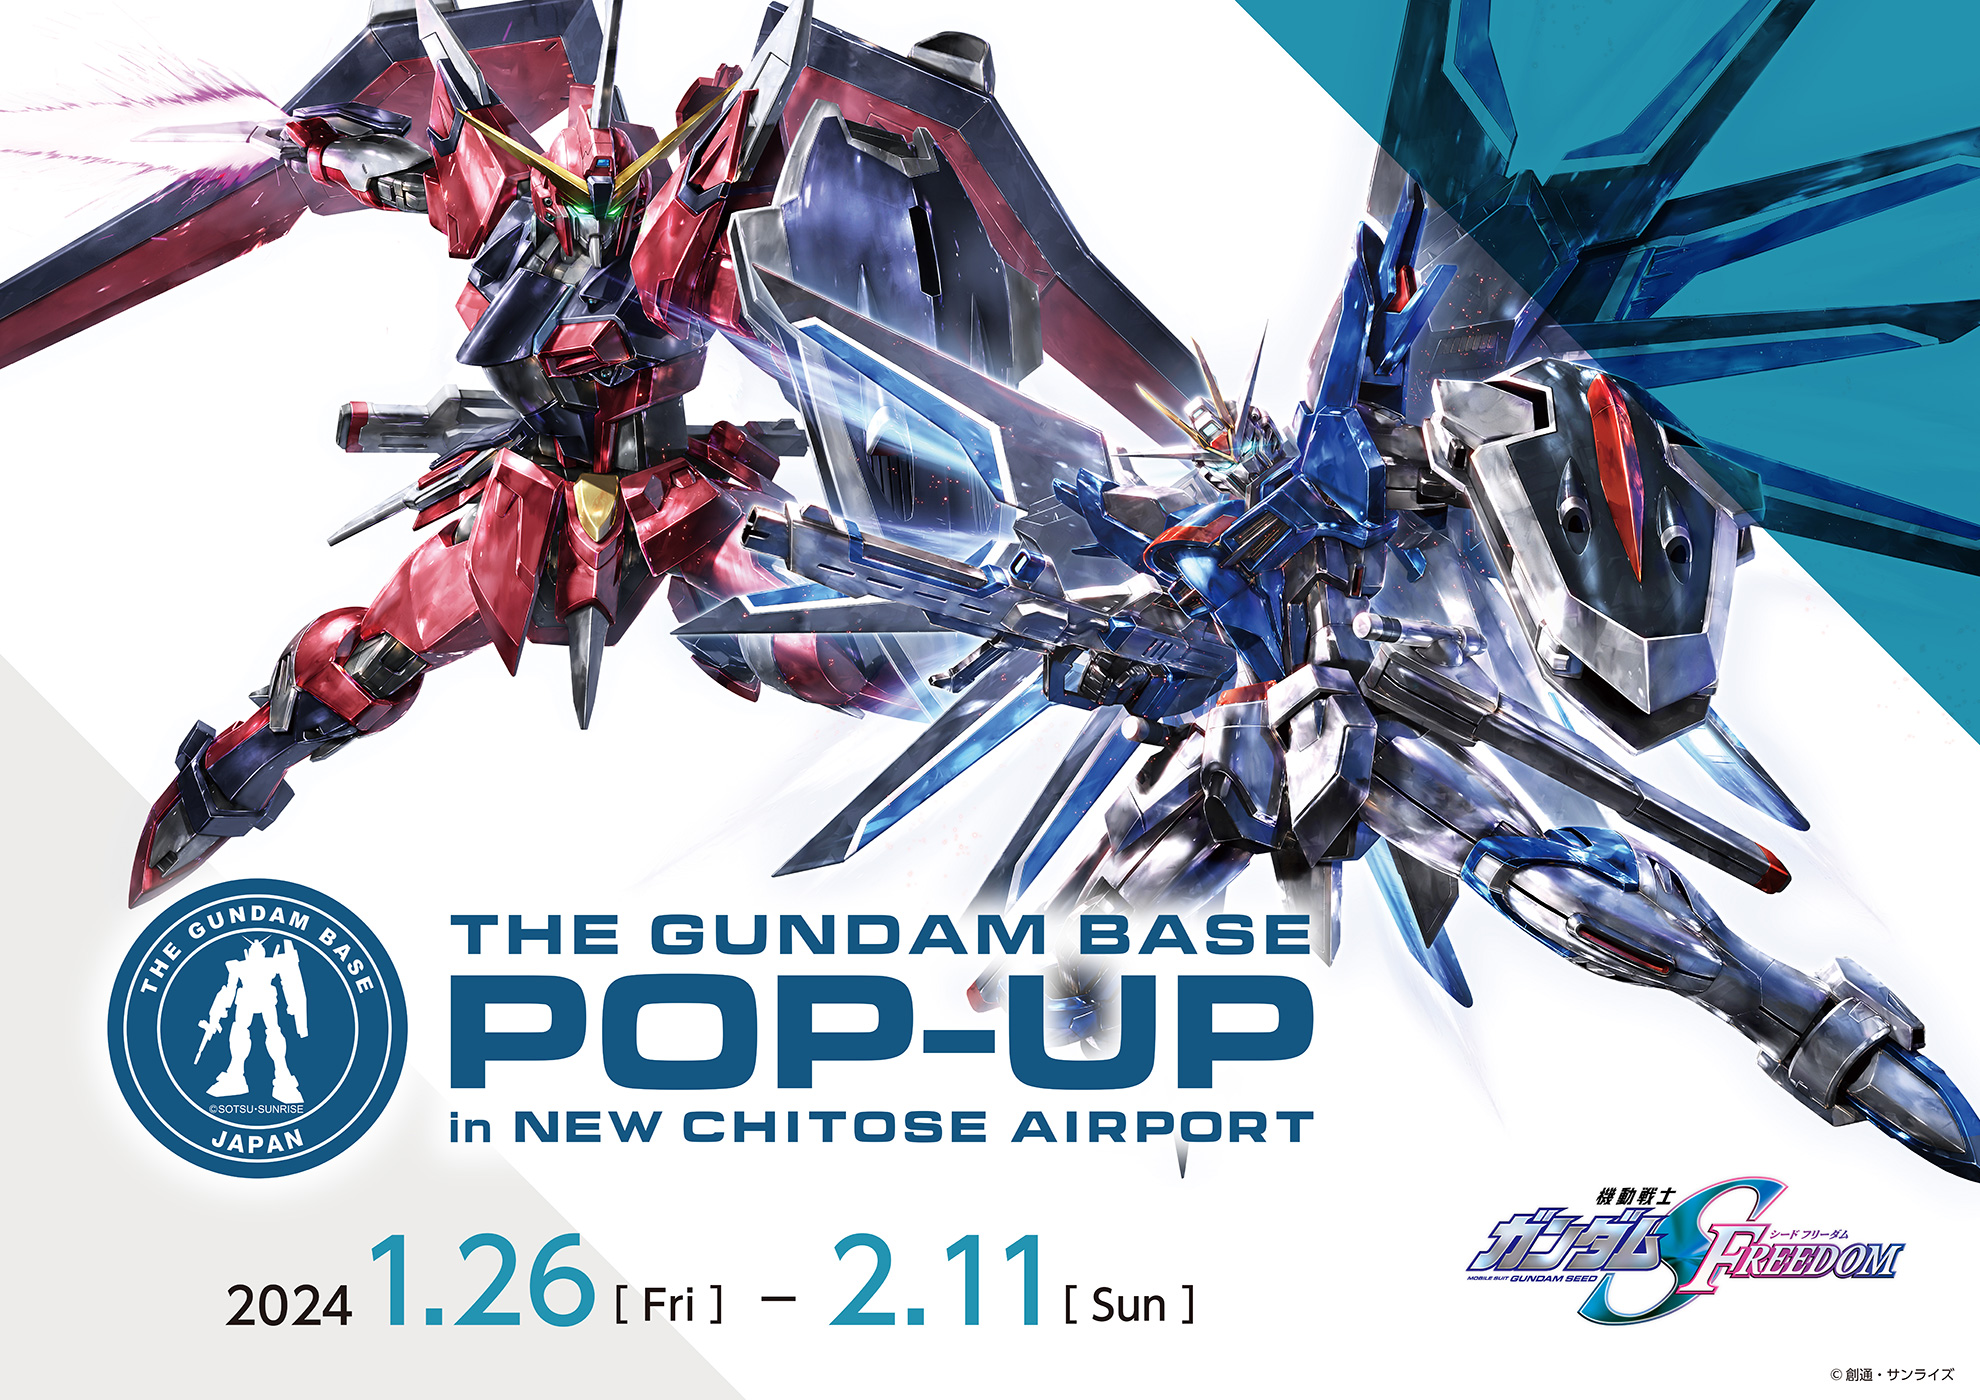 THE GUNDAM BASE POP-UP in NEW CHITOSE AIRPORT